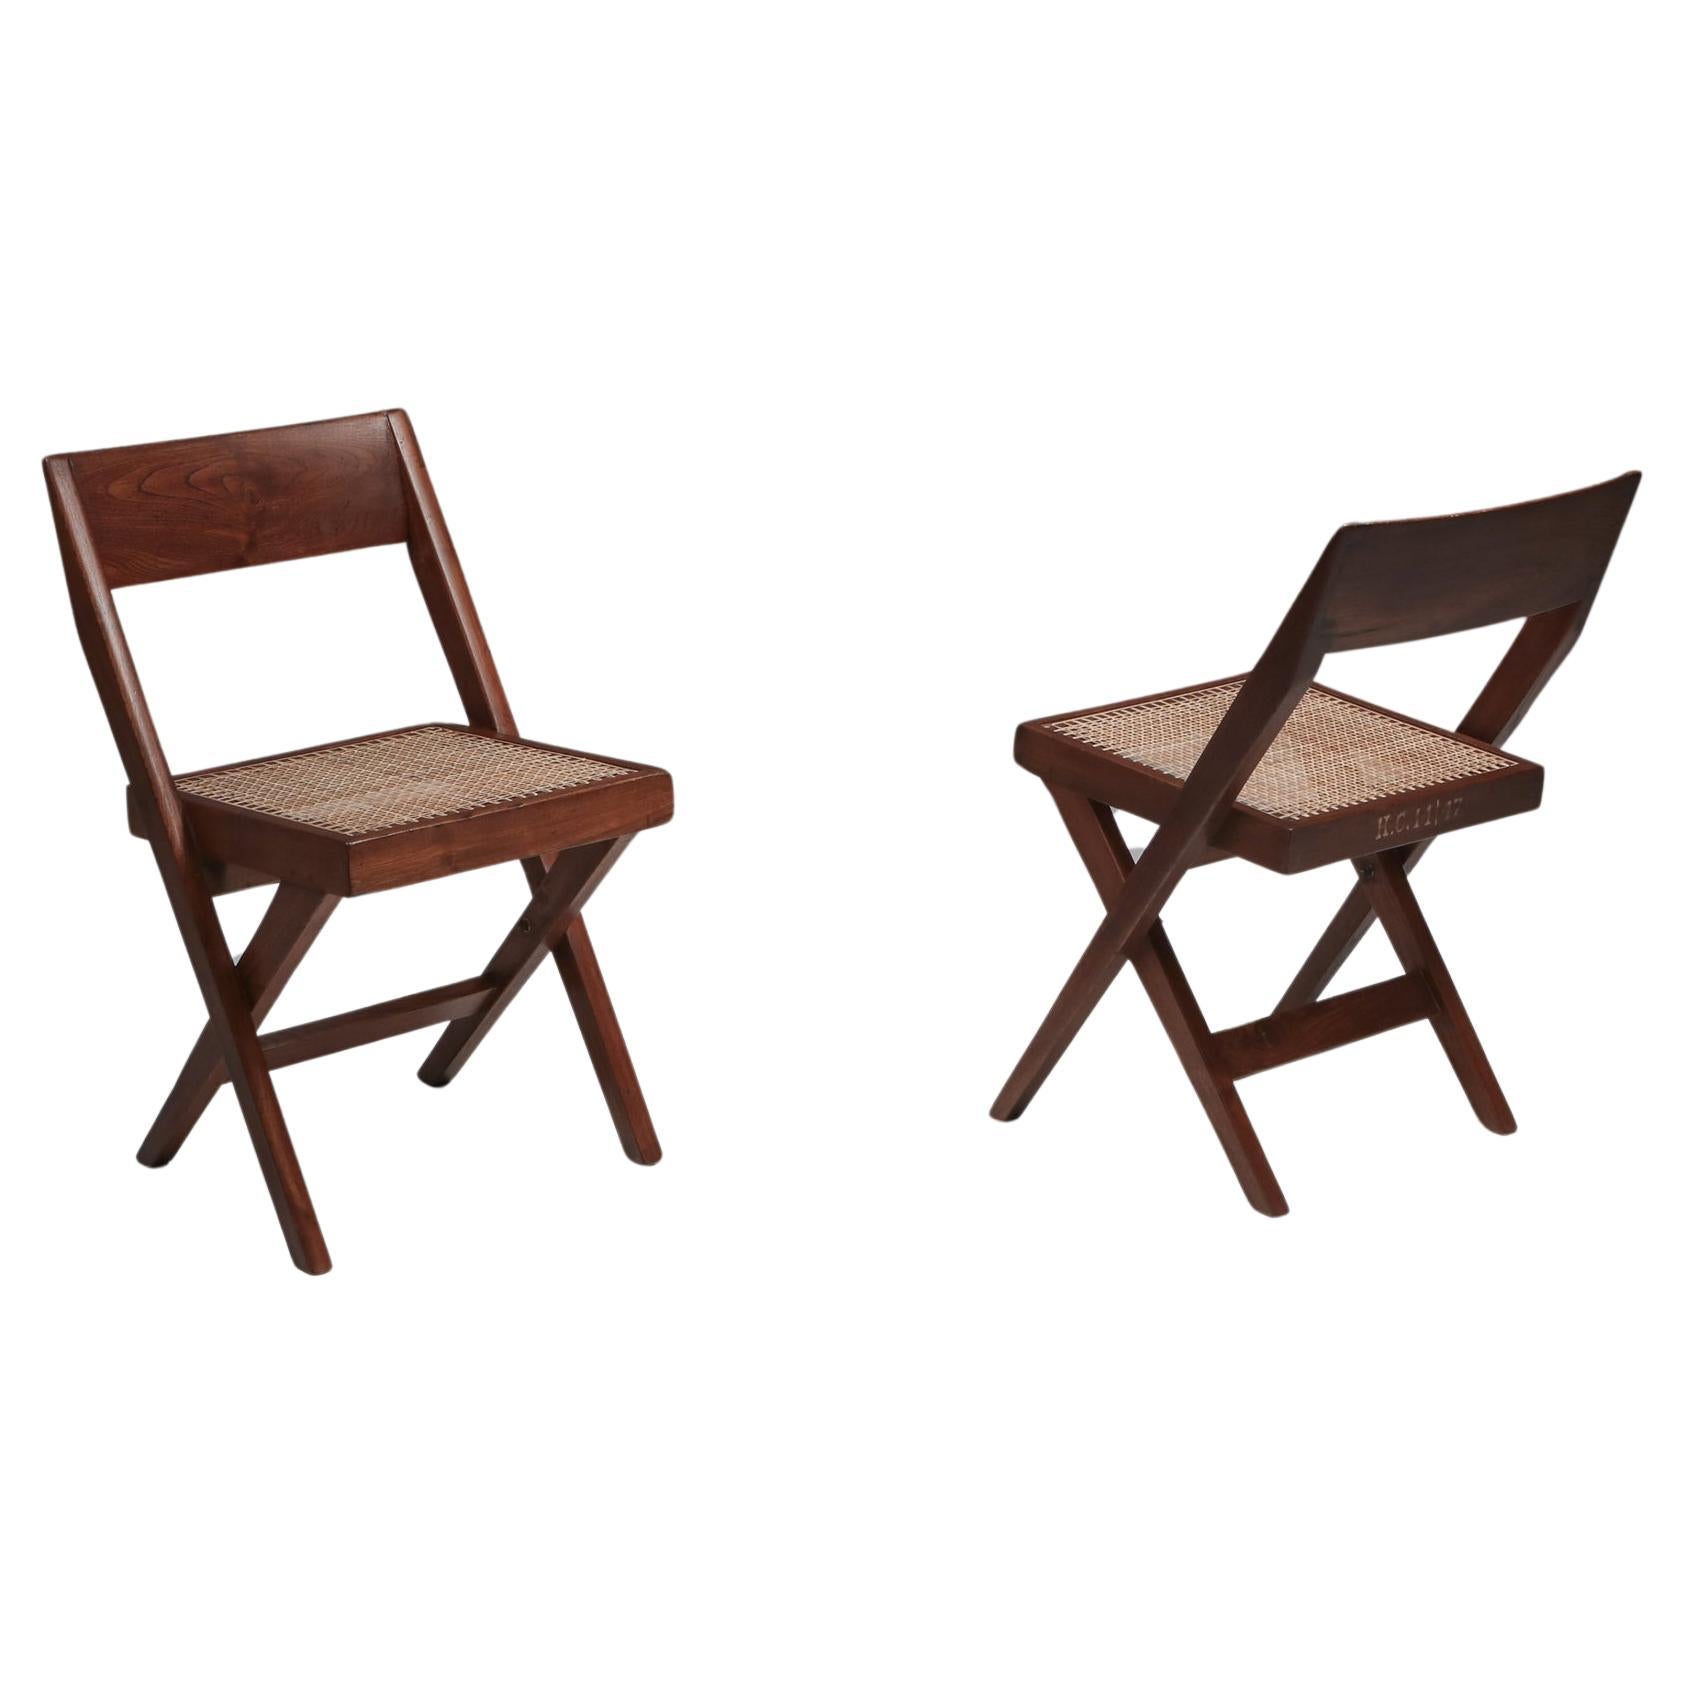 Pair of Library Chairs by Pierre Jeanneret, 1950s For Sale